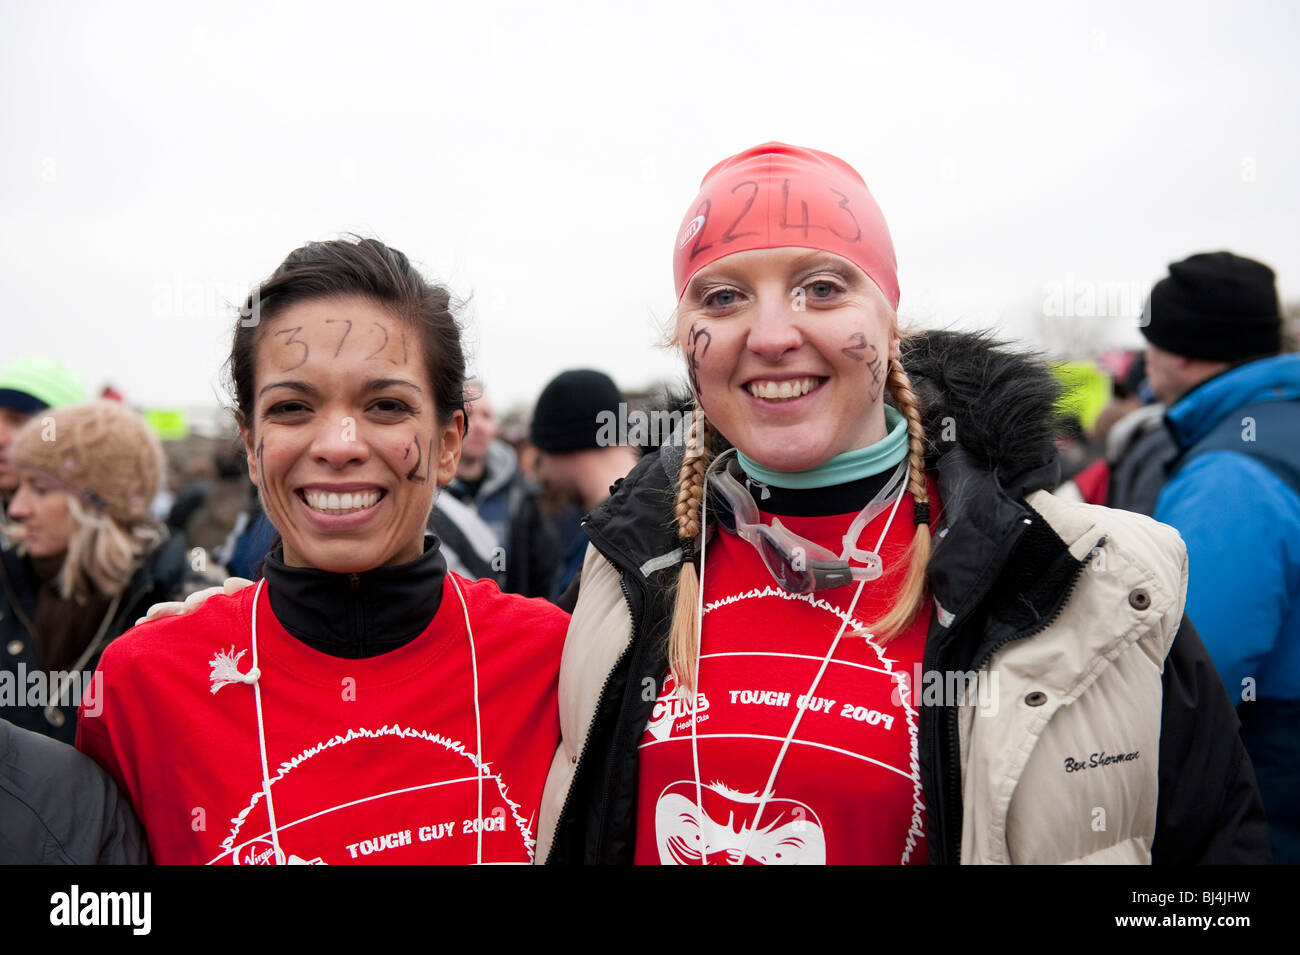 Two female participants in fun sporting event Stock Photo